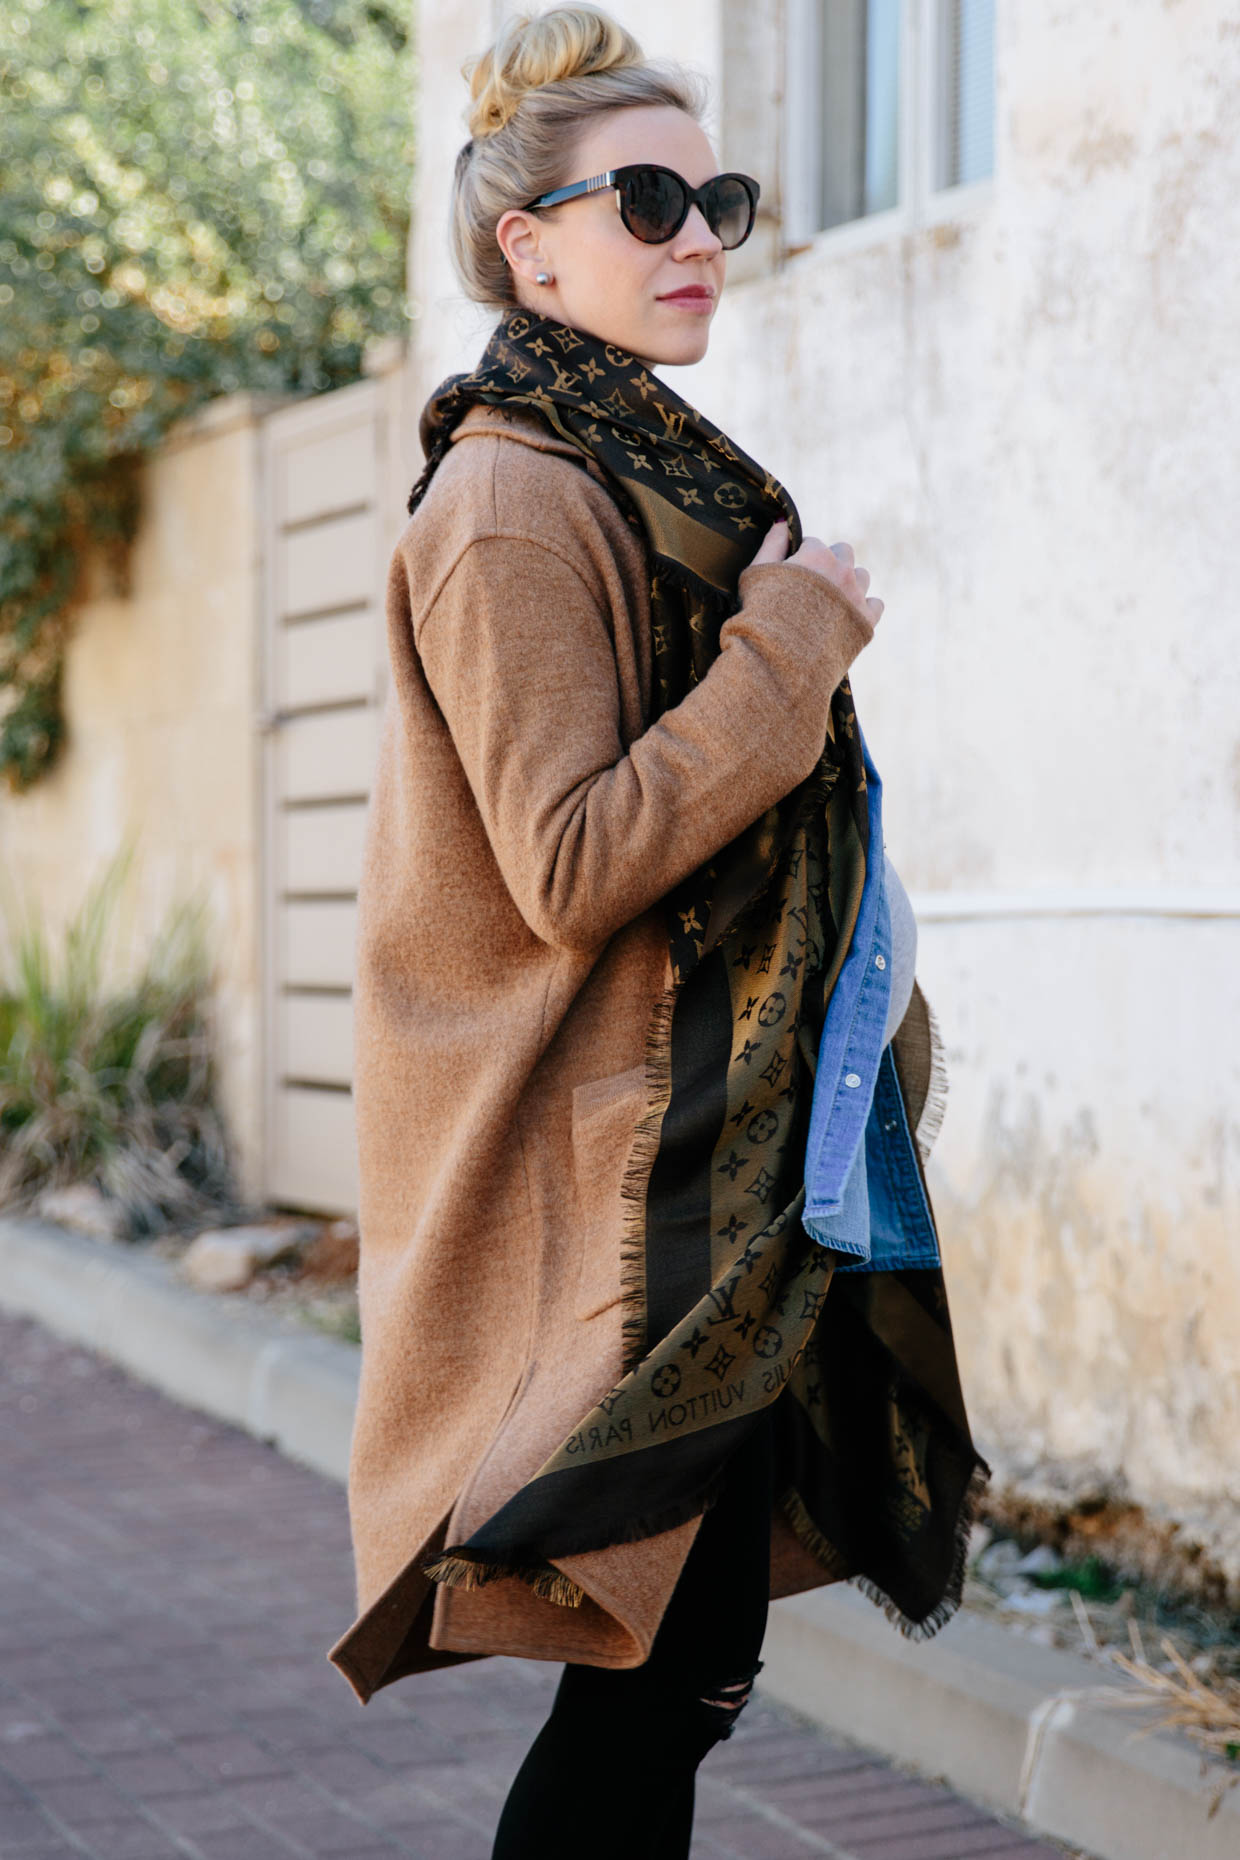 Meagan's Moda wearing drapey trench coat with Louis Vuitton scarf